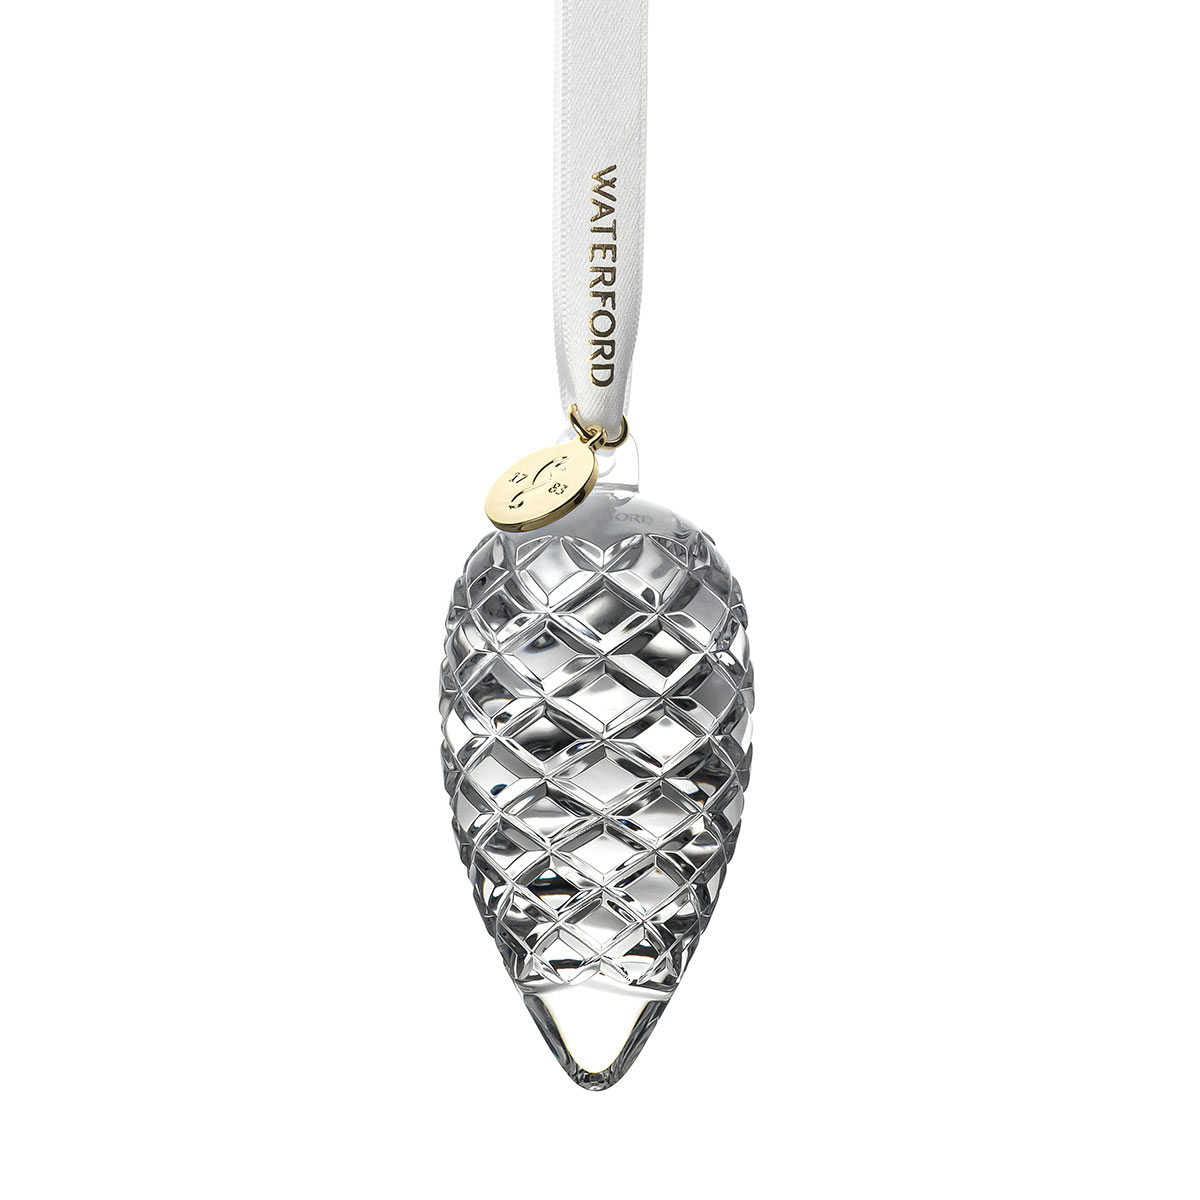 Waterford Crystal 2021 Pine Cone Ornament